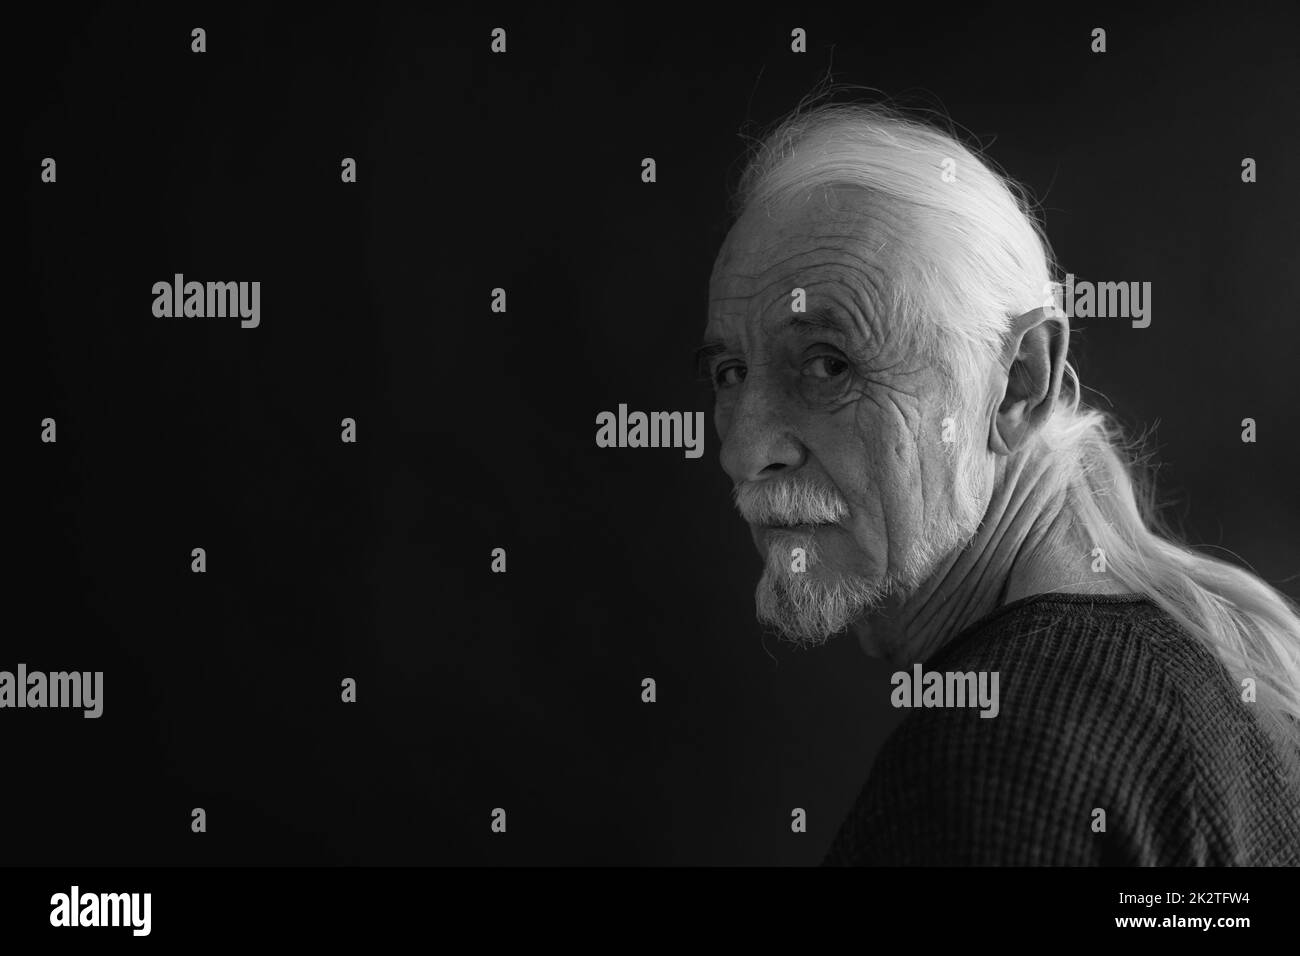 Black and white portrait of old alone man. Stock Photo